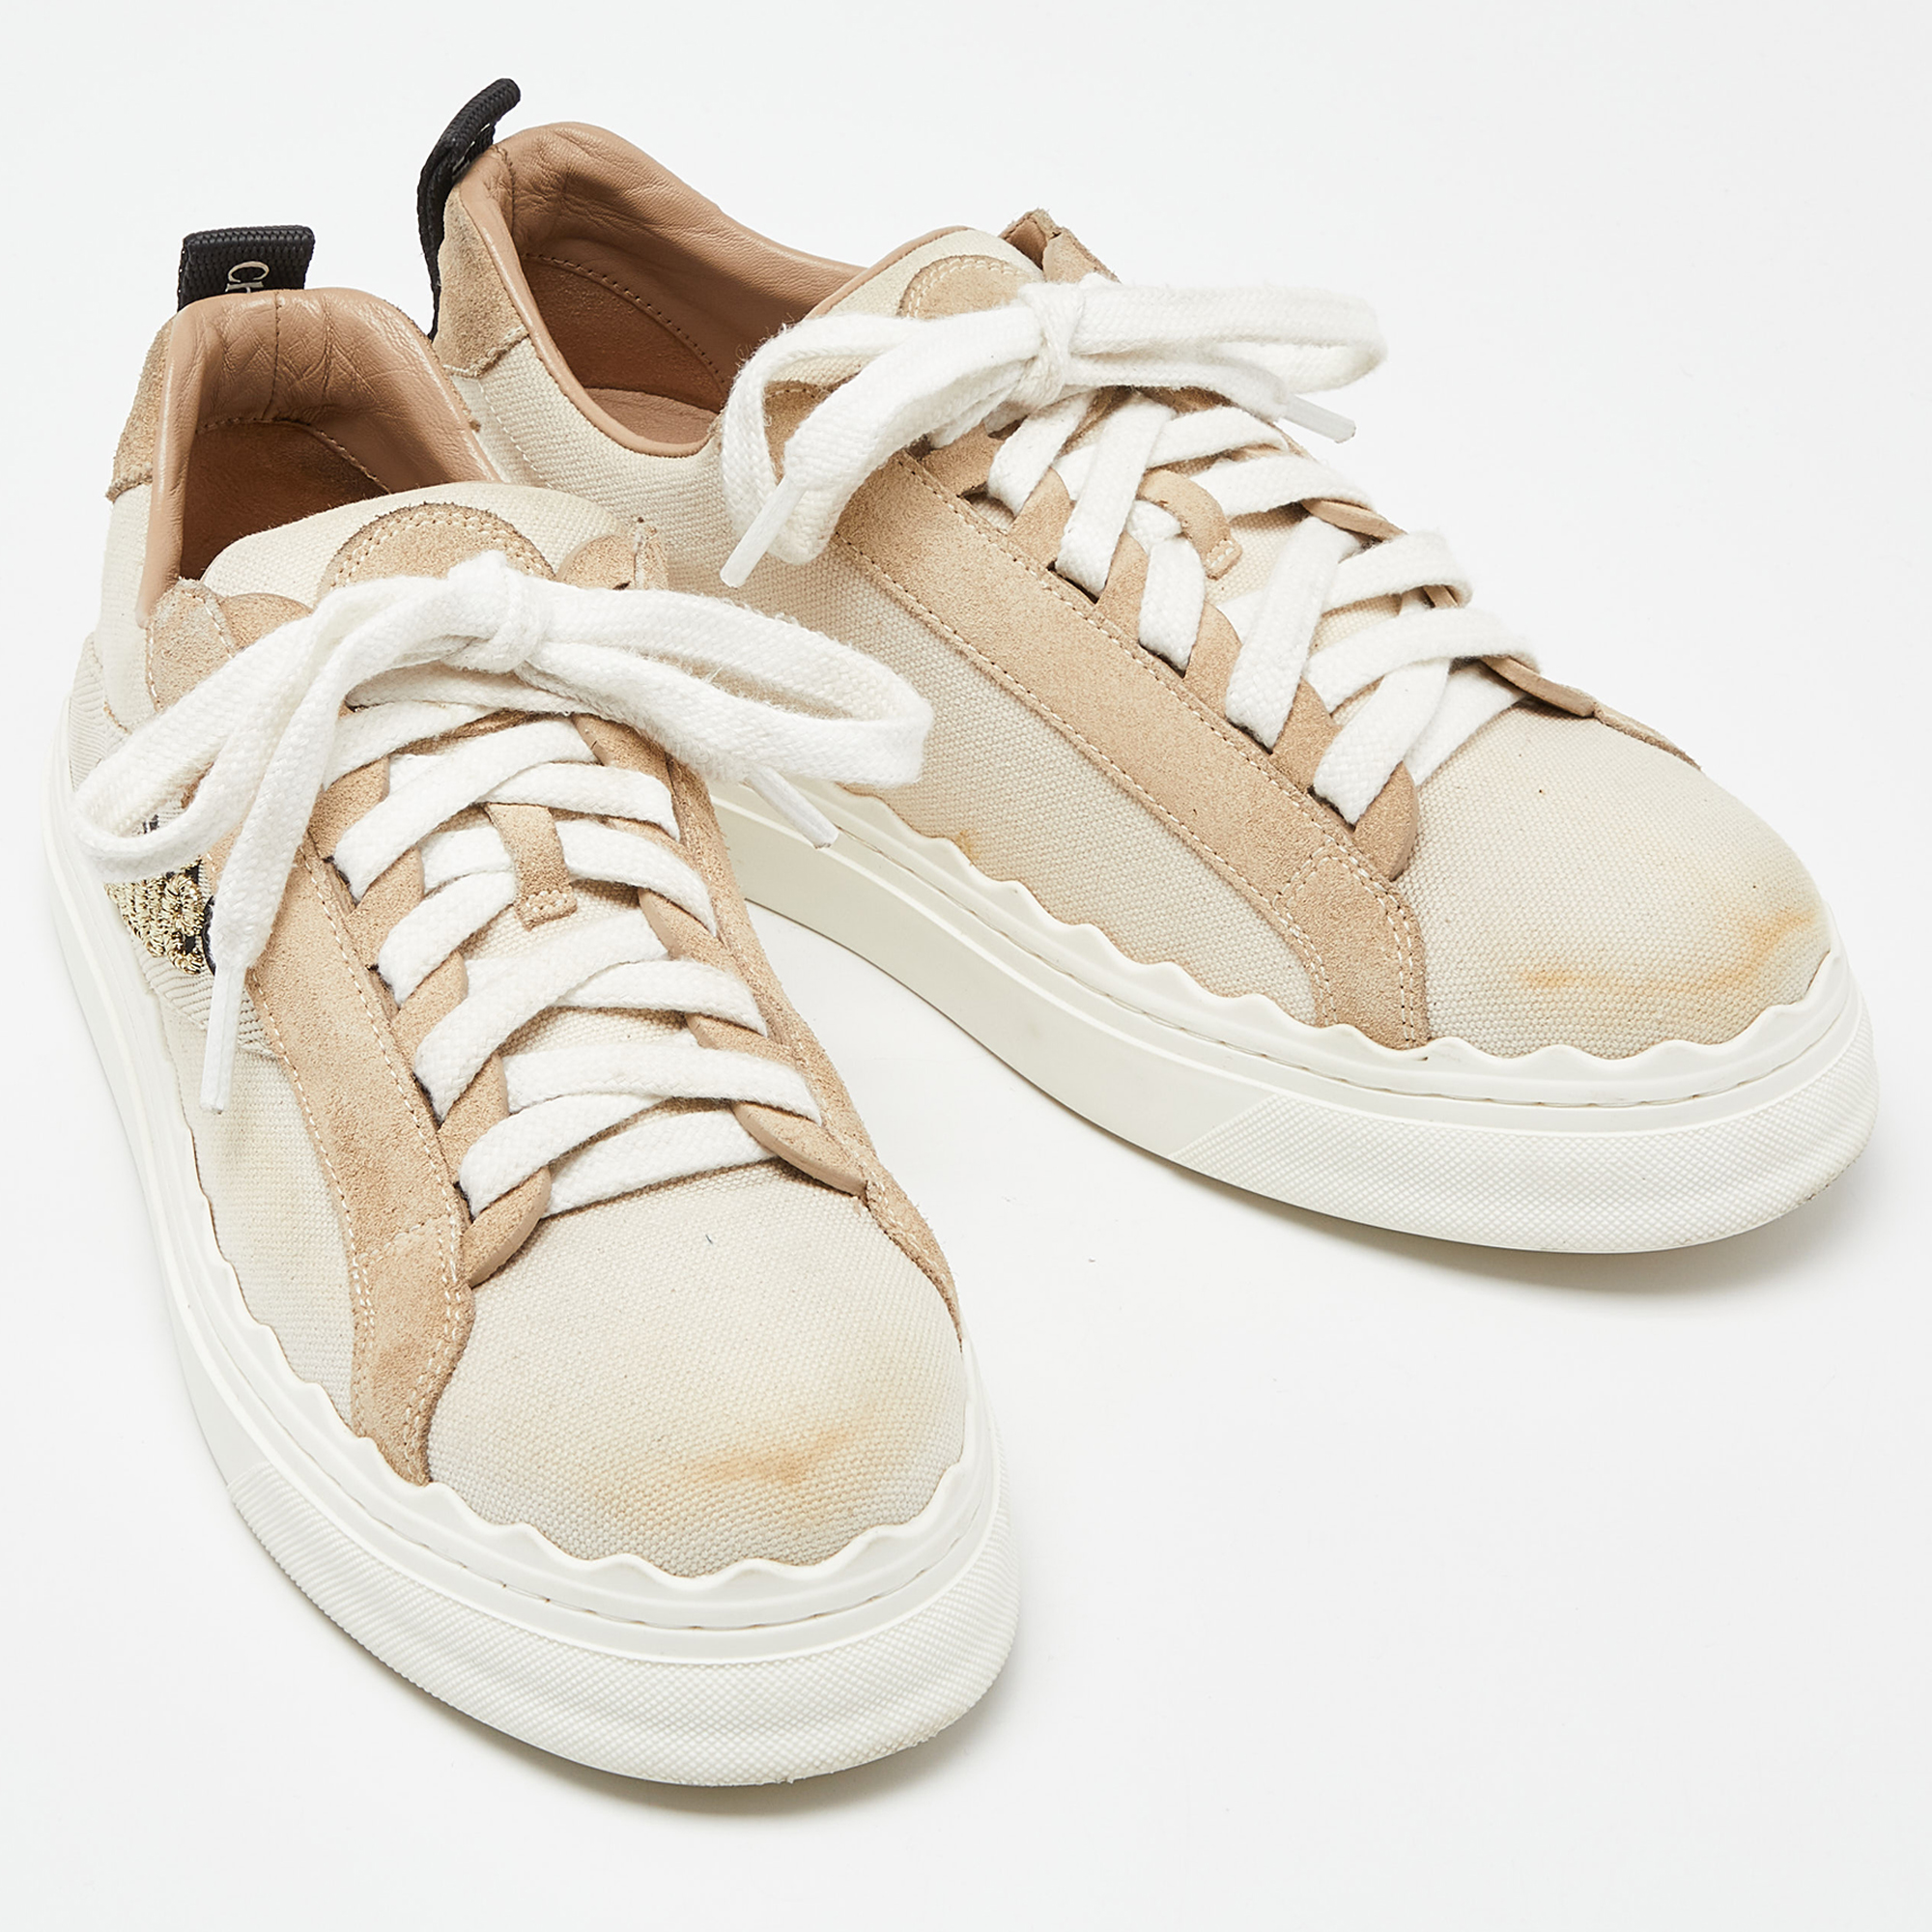 Chloé Beige Canvas And Suede Lauren Logo Embroidered Low Top Sneakers Size 39